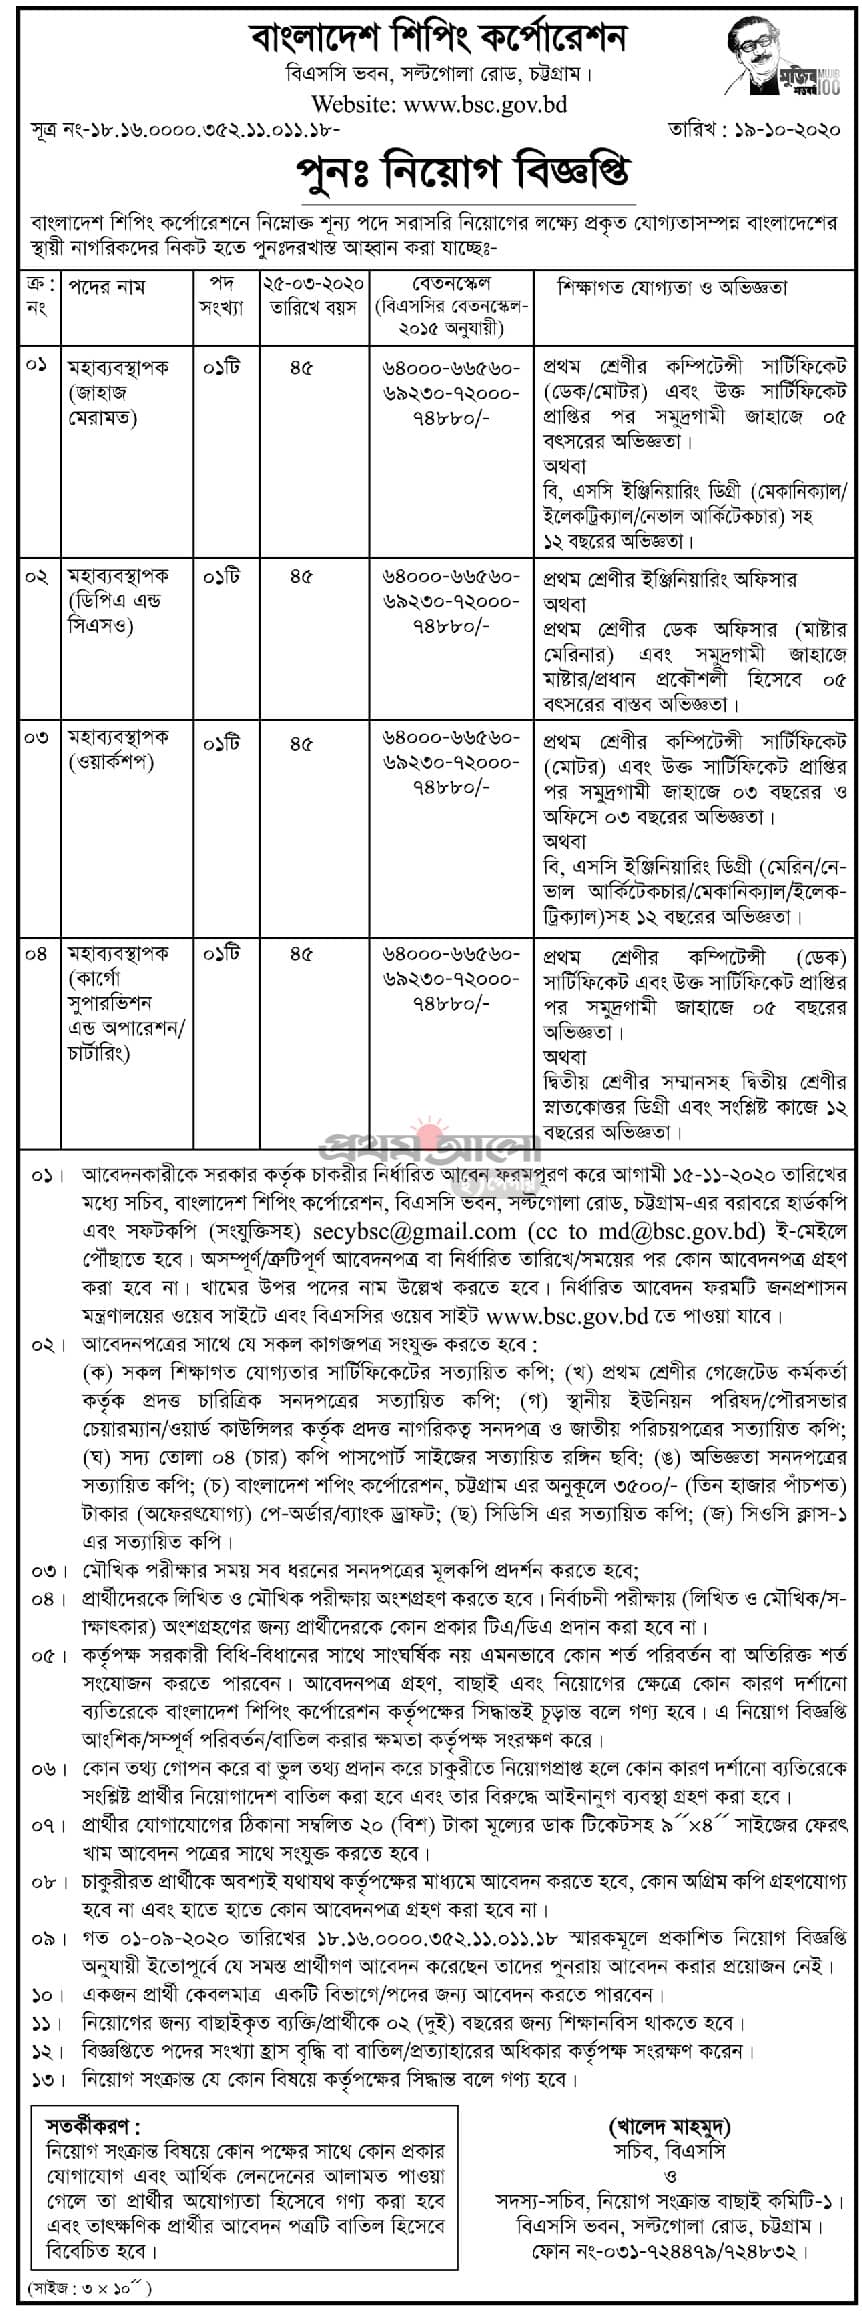 Govt job bd for General Manager at Shipping Corporation